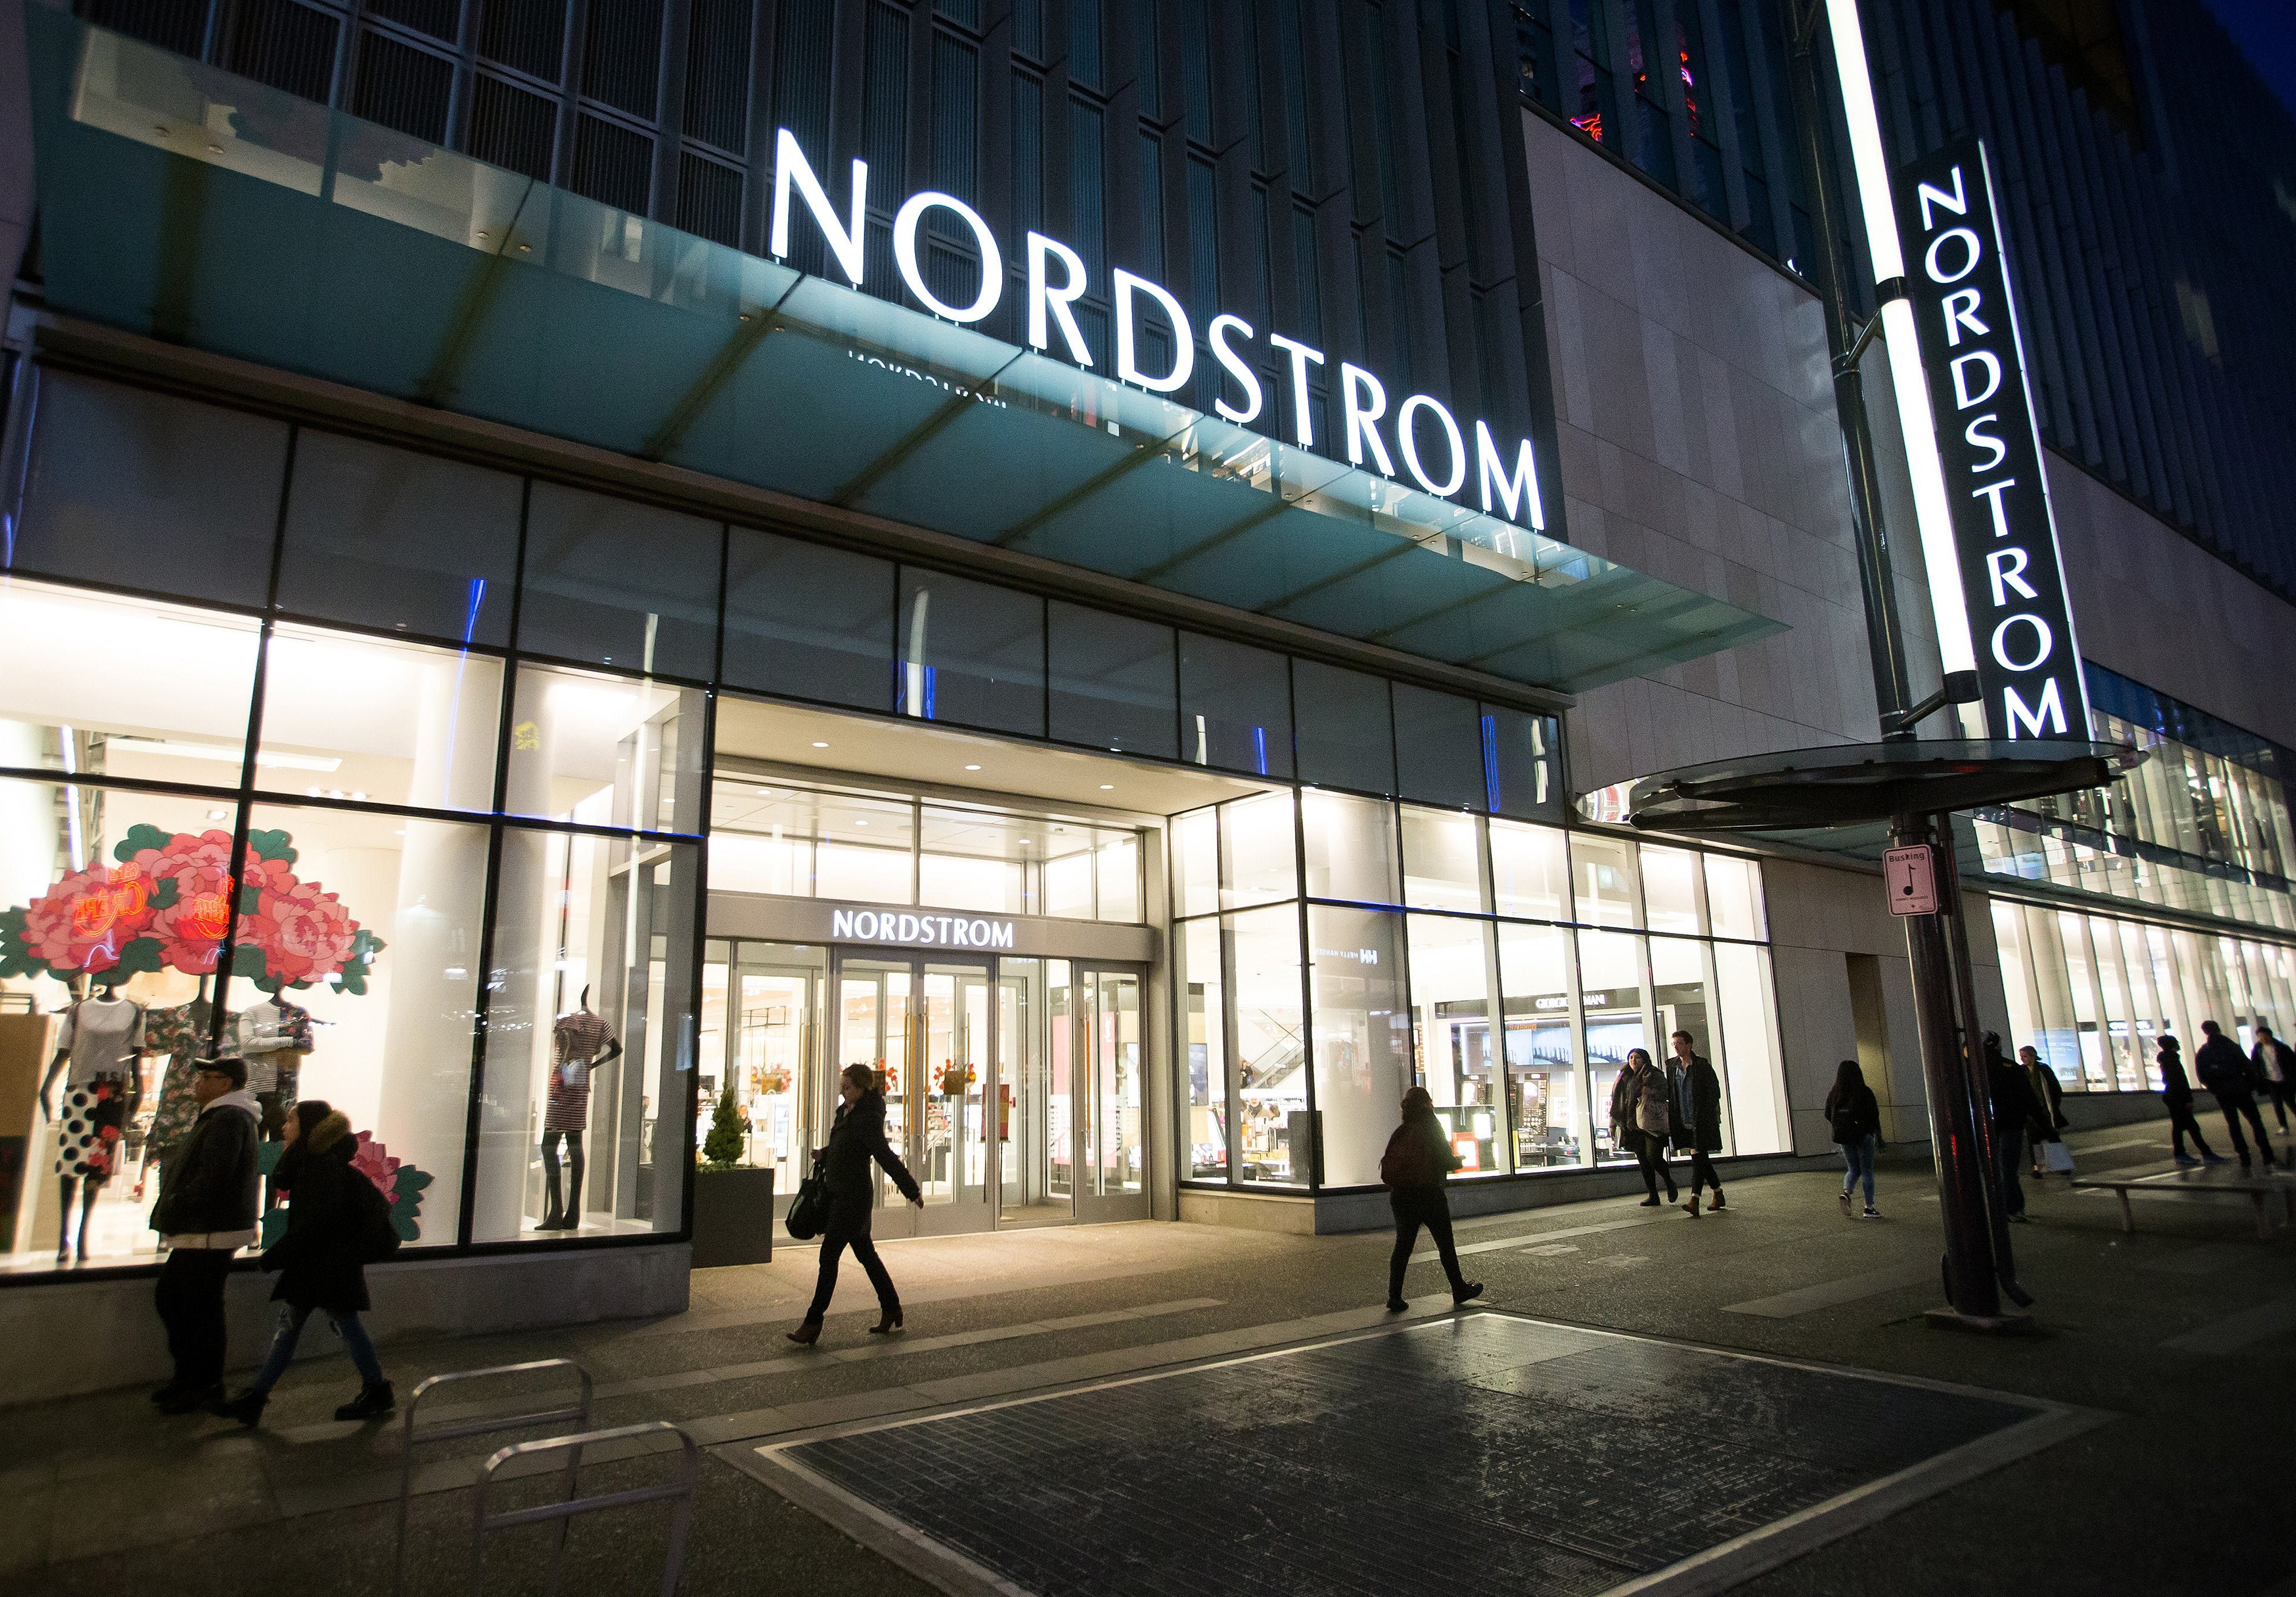 White House Says Nordstrom Decision Was ‘Direct Attack’ on President Trump